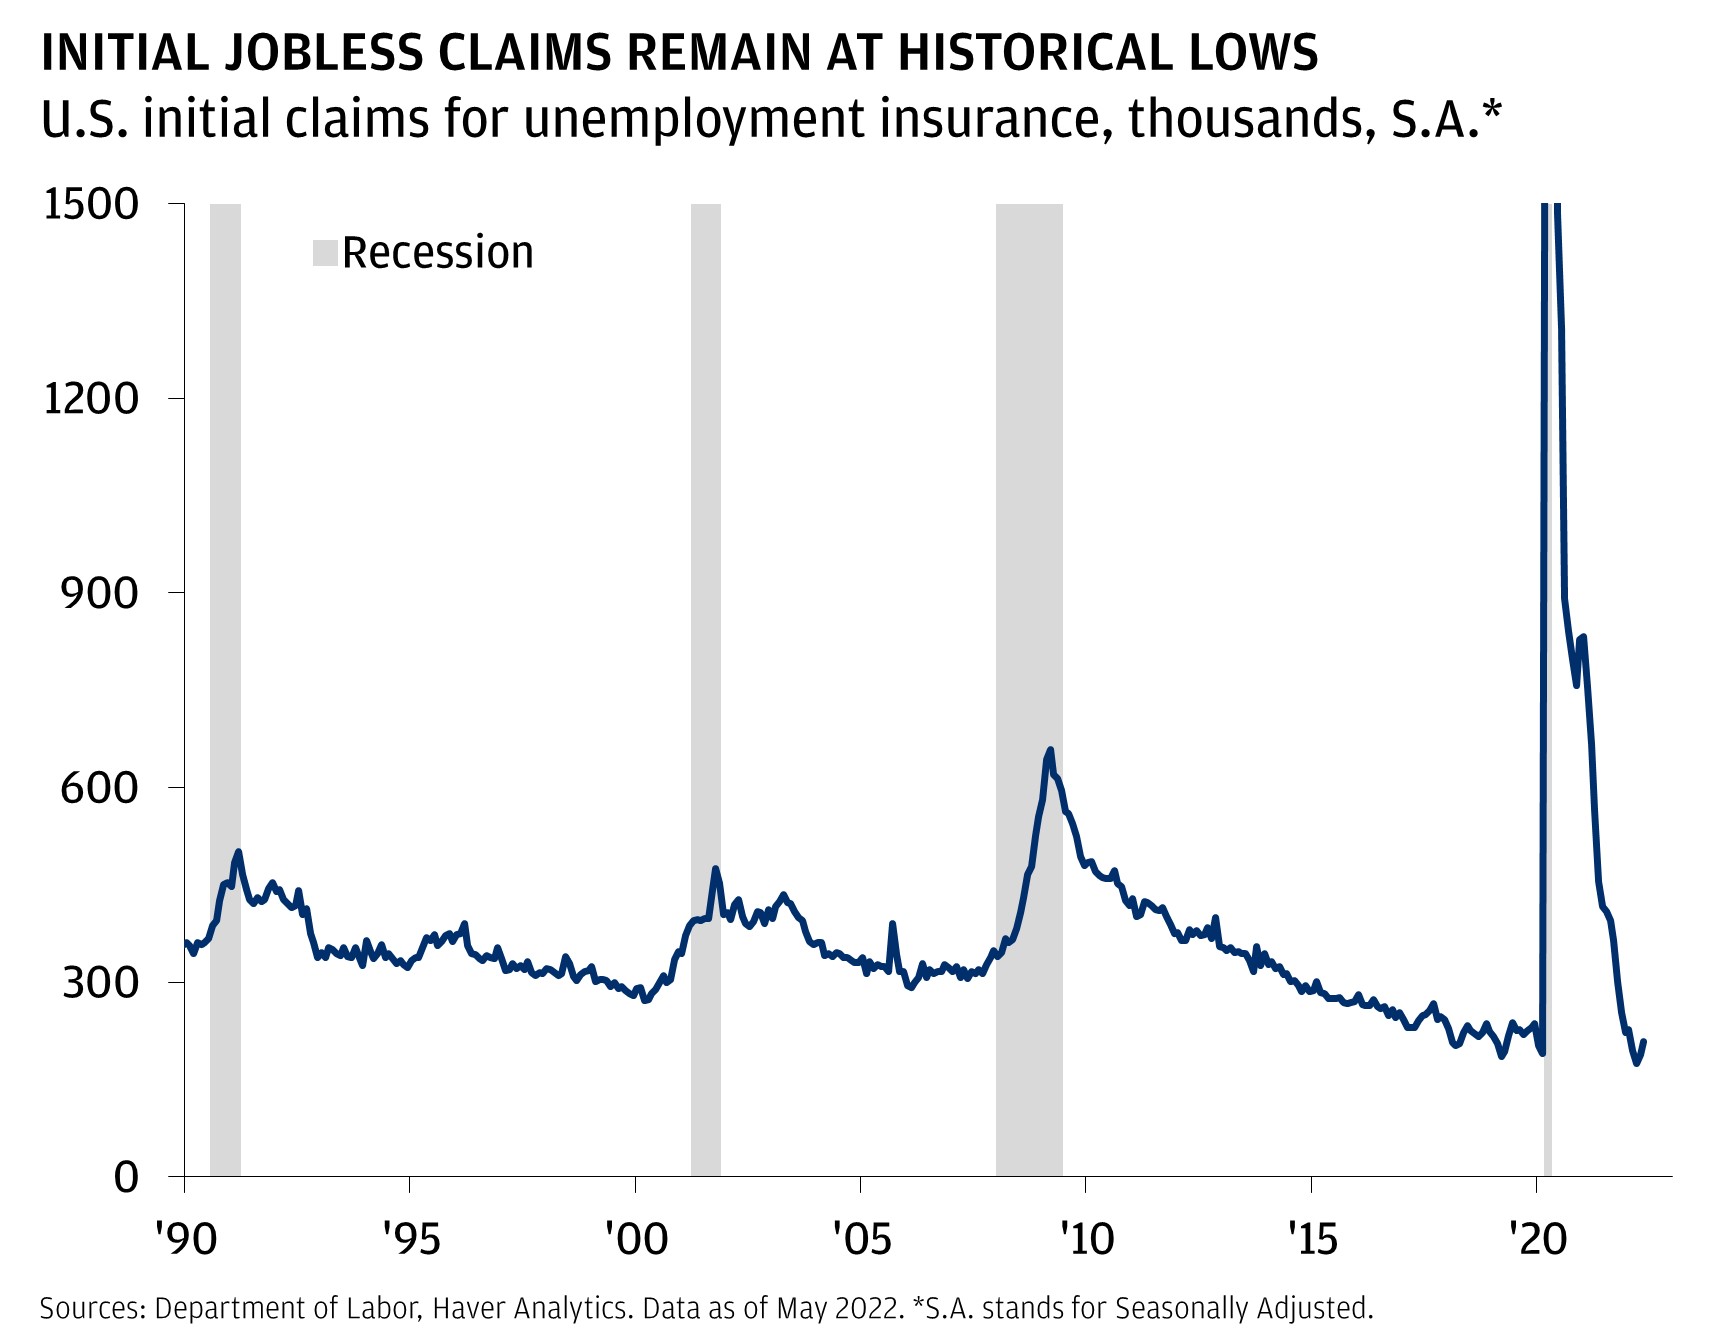 This chart shows the initial jobless claims, from January 1990 until May 2022.